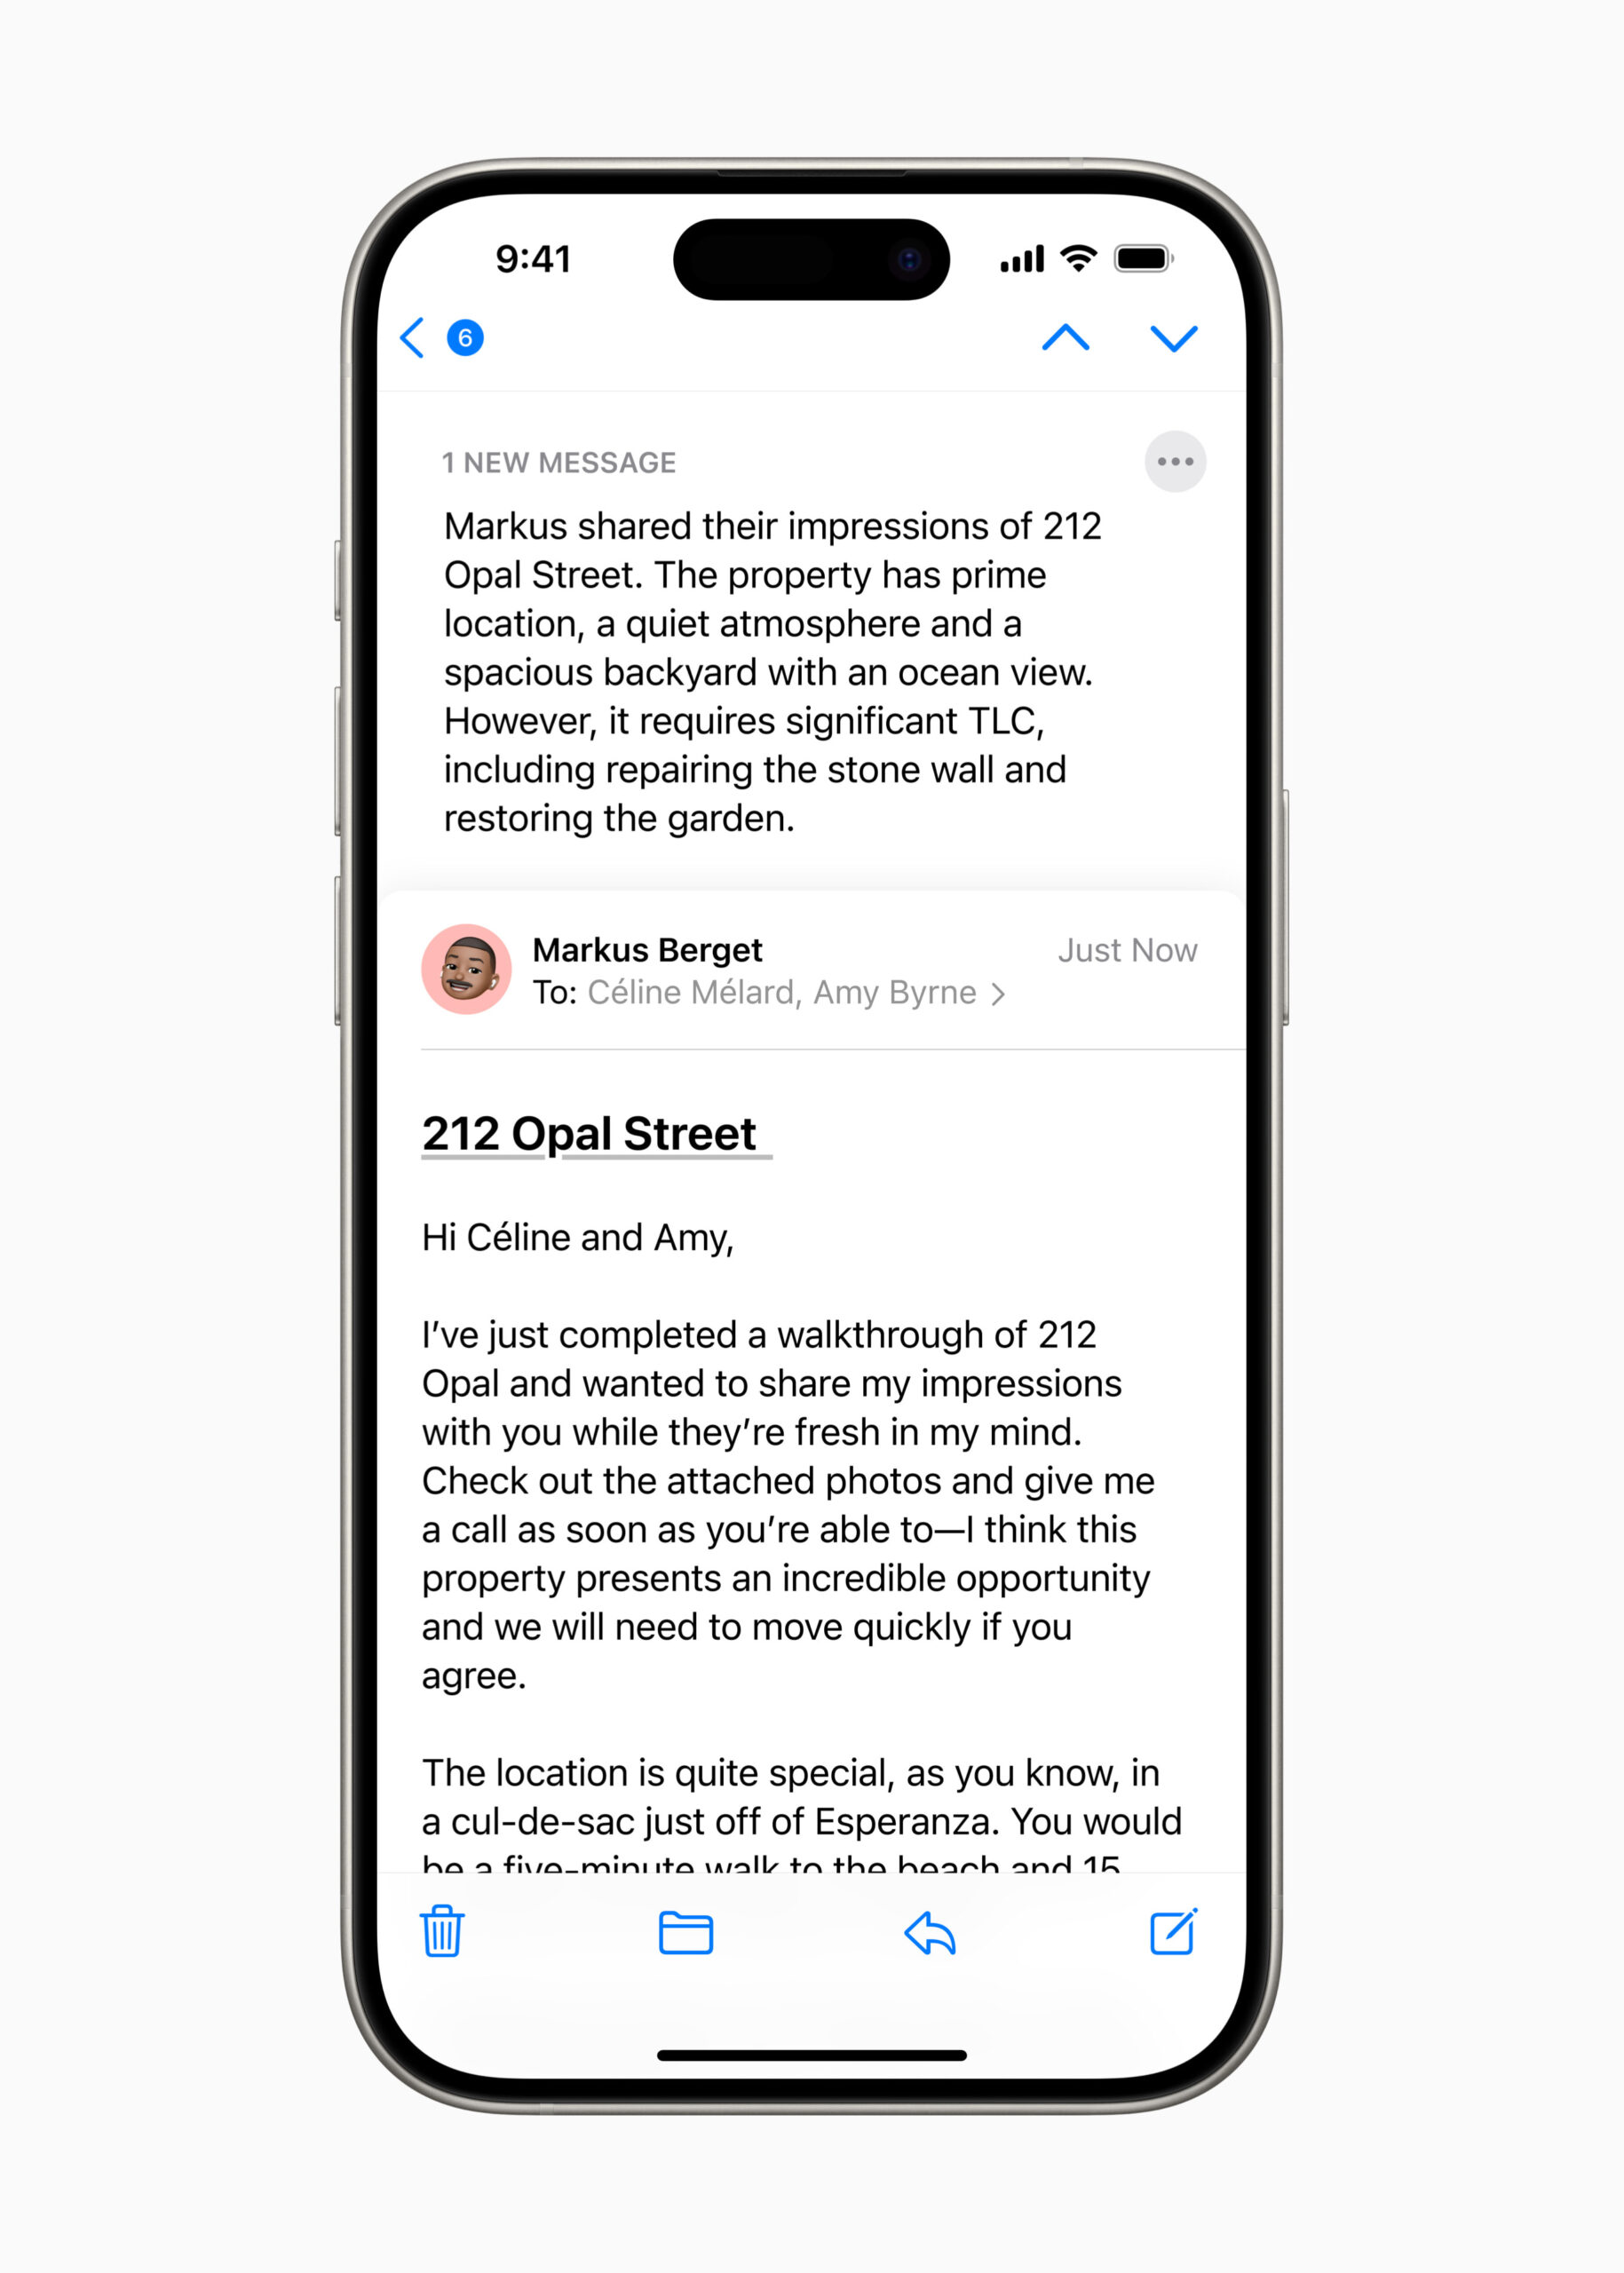 Email summary in Mail app on iPhone using Apple Intelligence.